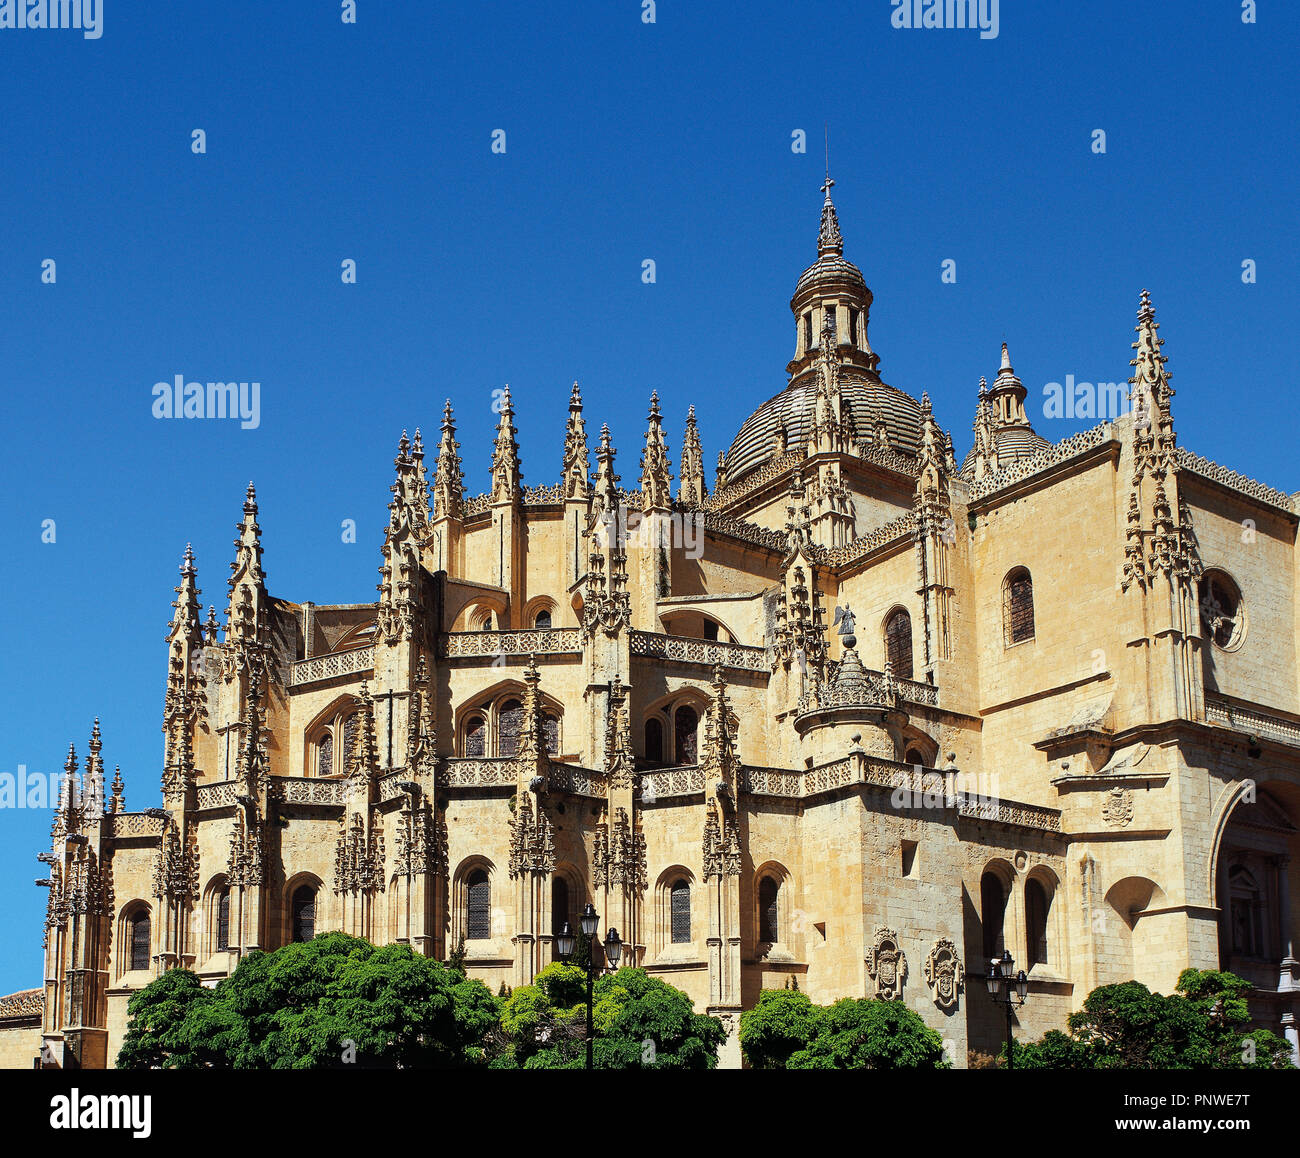 Gothic Art. Spain. Segovia. Cathedral. Built between 1525 and 1577 by Juan Gil de Hontanon (1480-1526) and finished by his son Rodrigo (1500Ð1577)  at his death. Exterior view. Detail. Stock Photo